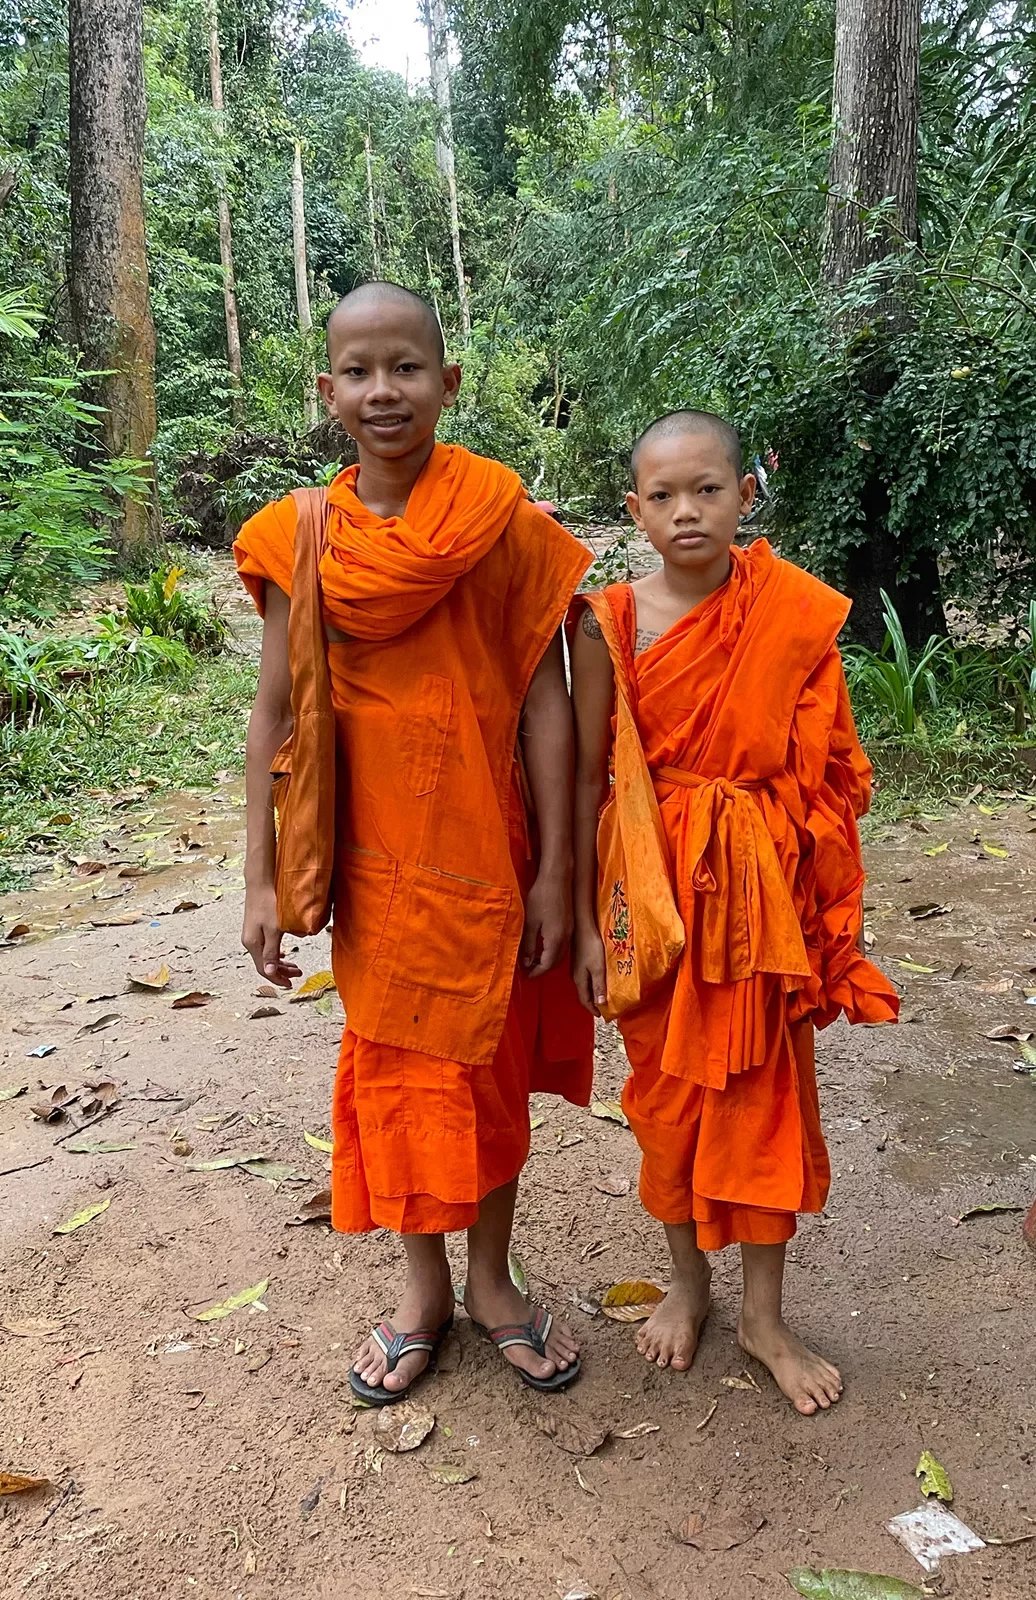 Two monks in traditional orange robes